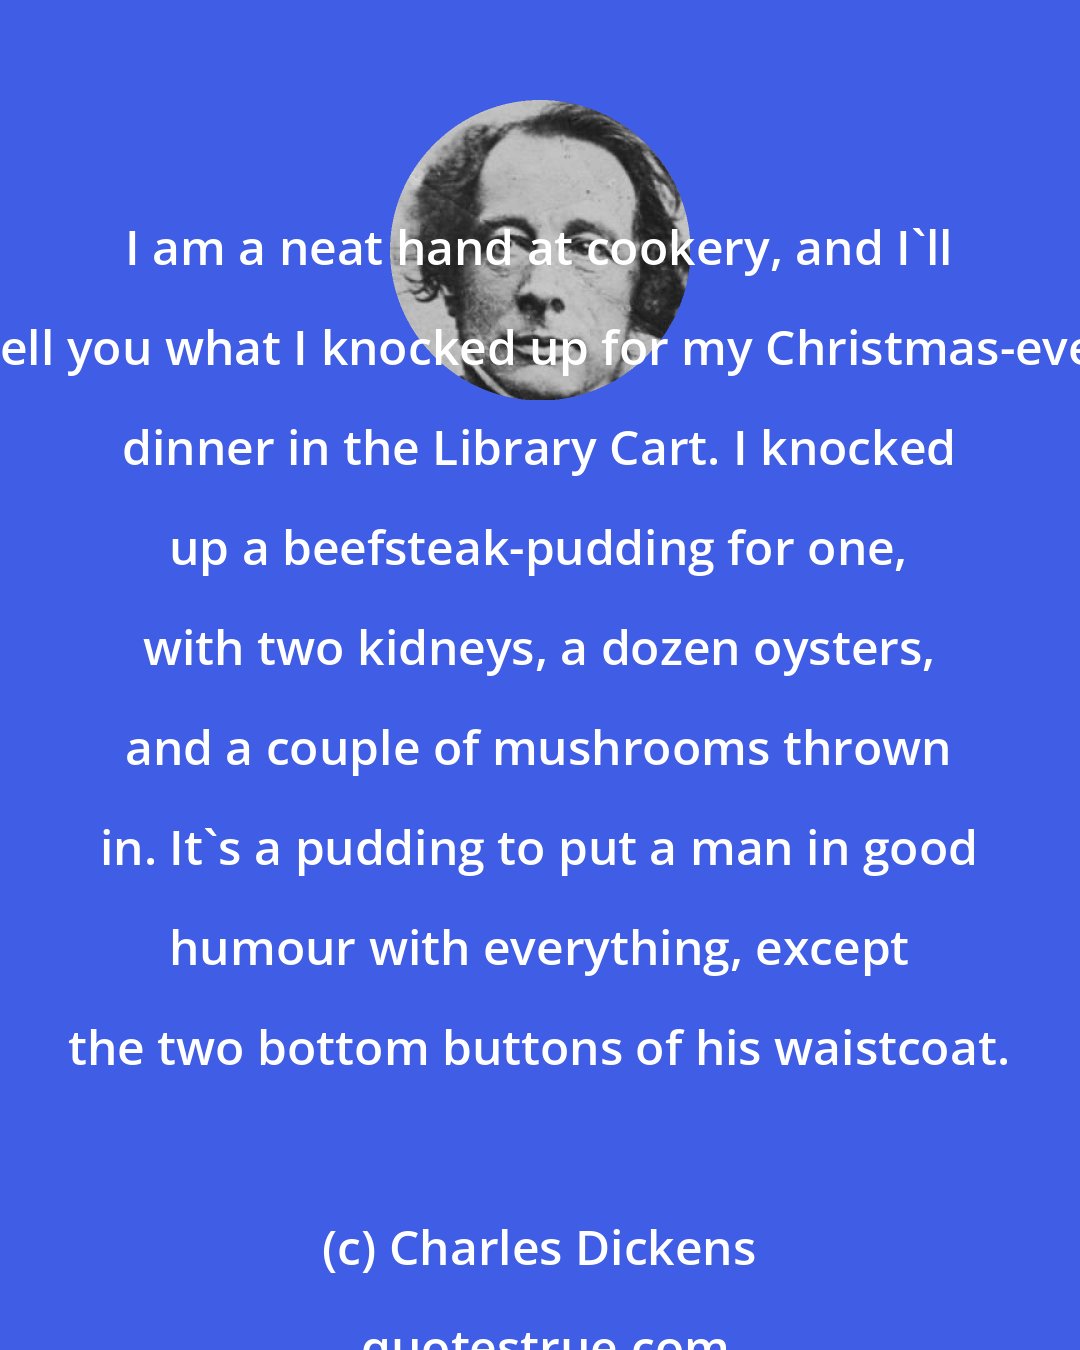 Charles Dickens: I am a neat hand at cookery, and I'll tell you what I knocked up for my Christmas-eve dinner in the Library Cart. I knocked up a beefsteak-pudding for one, with two kidneys, a dozen oysters, and a couple of mushrooms thrown in. It's a pudding to put a man in good humour with everything, except the two bottom buttons of his waistcoat.